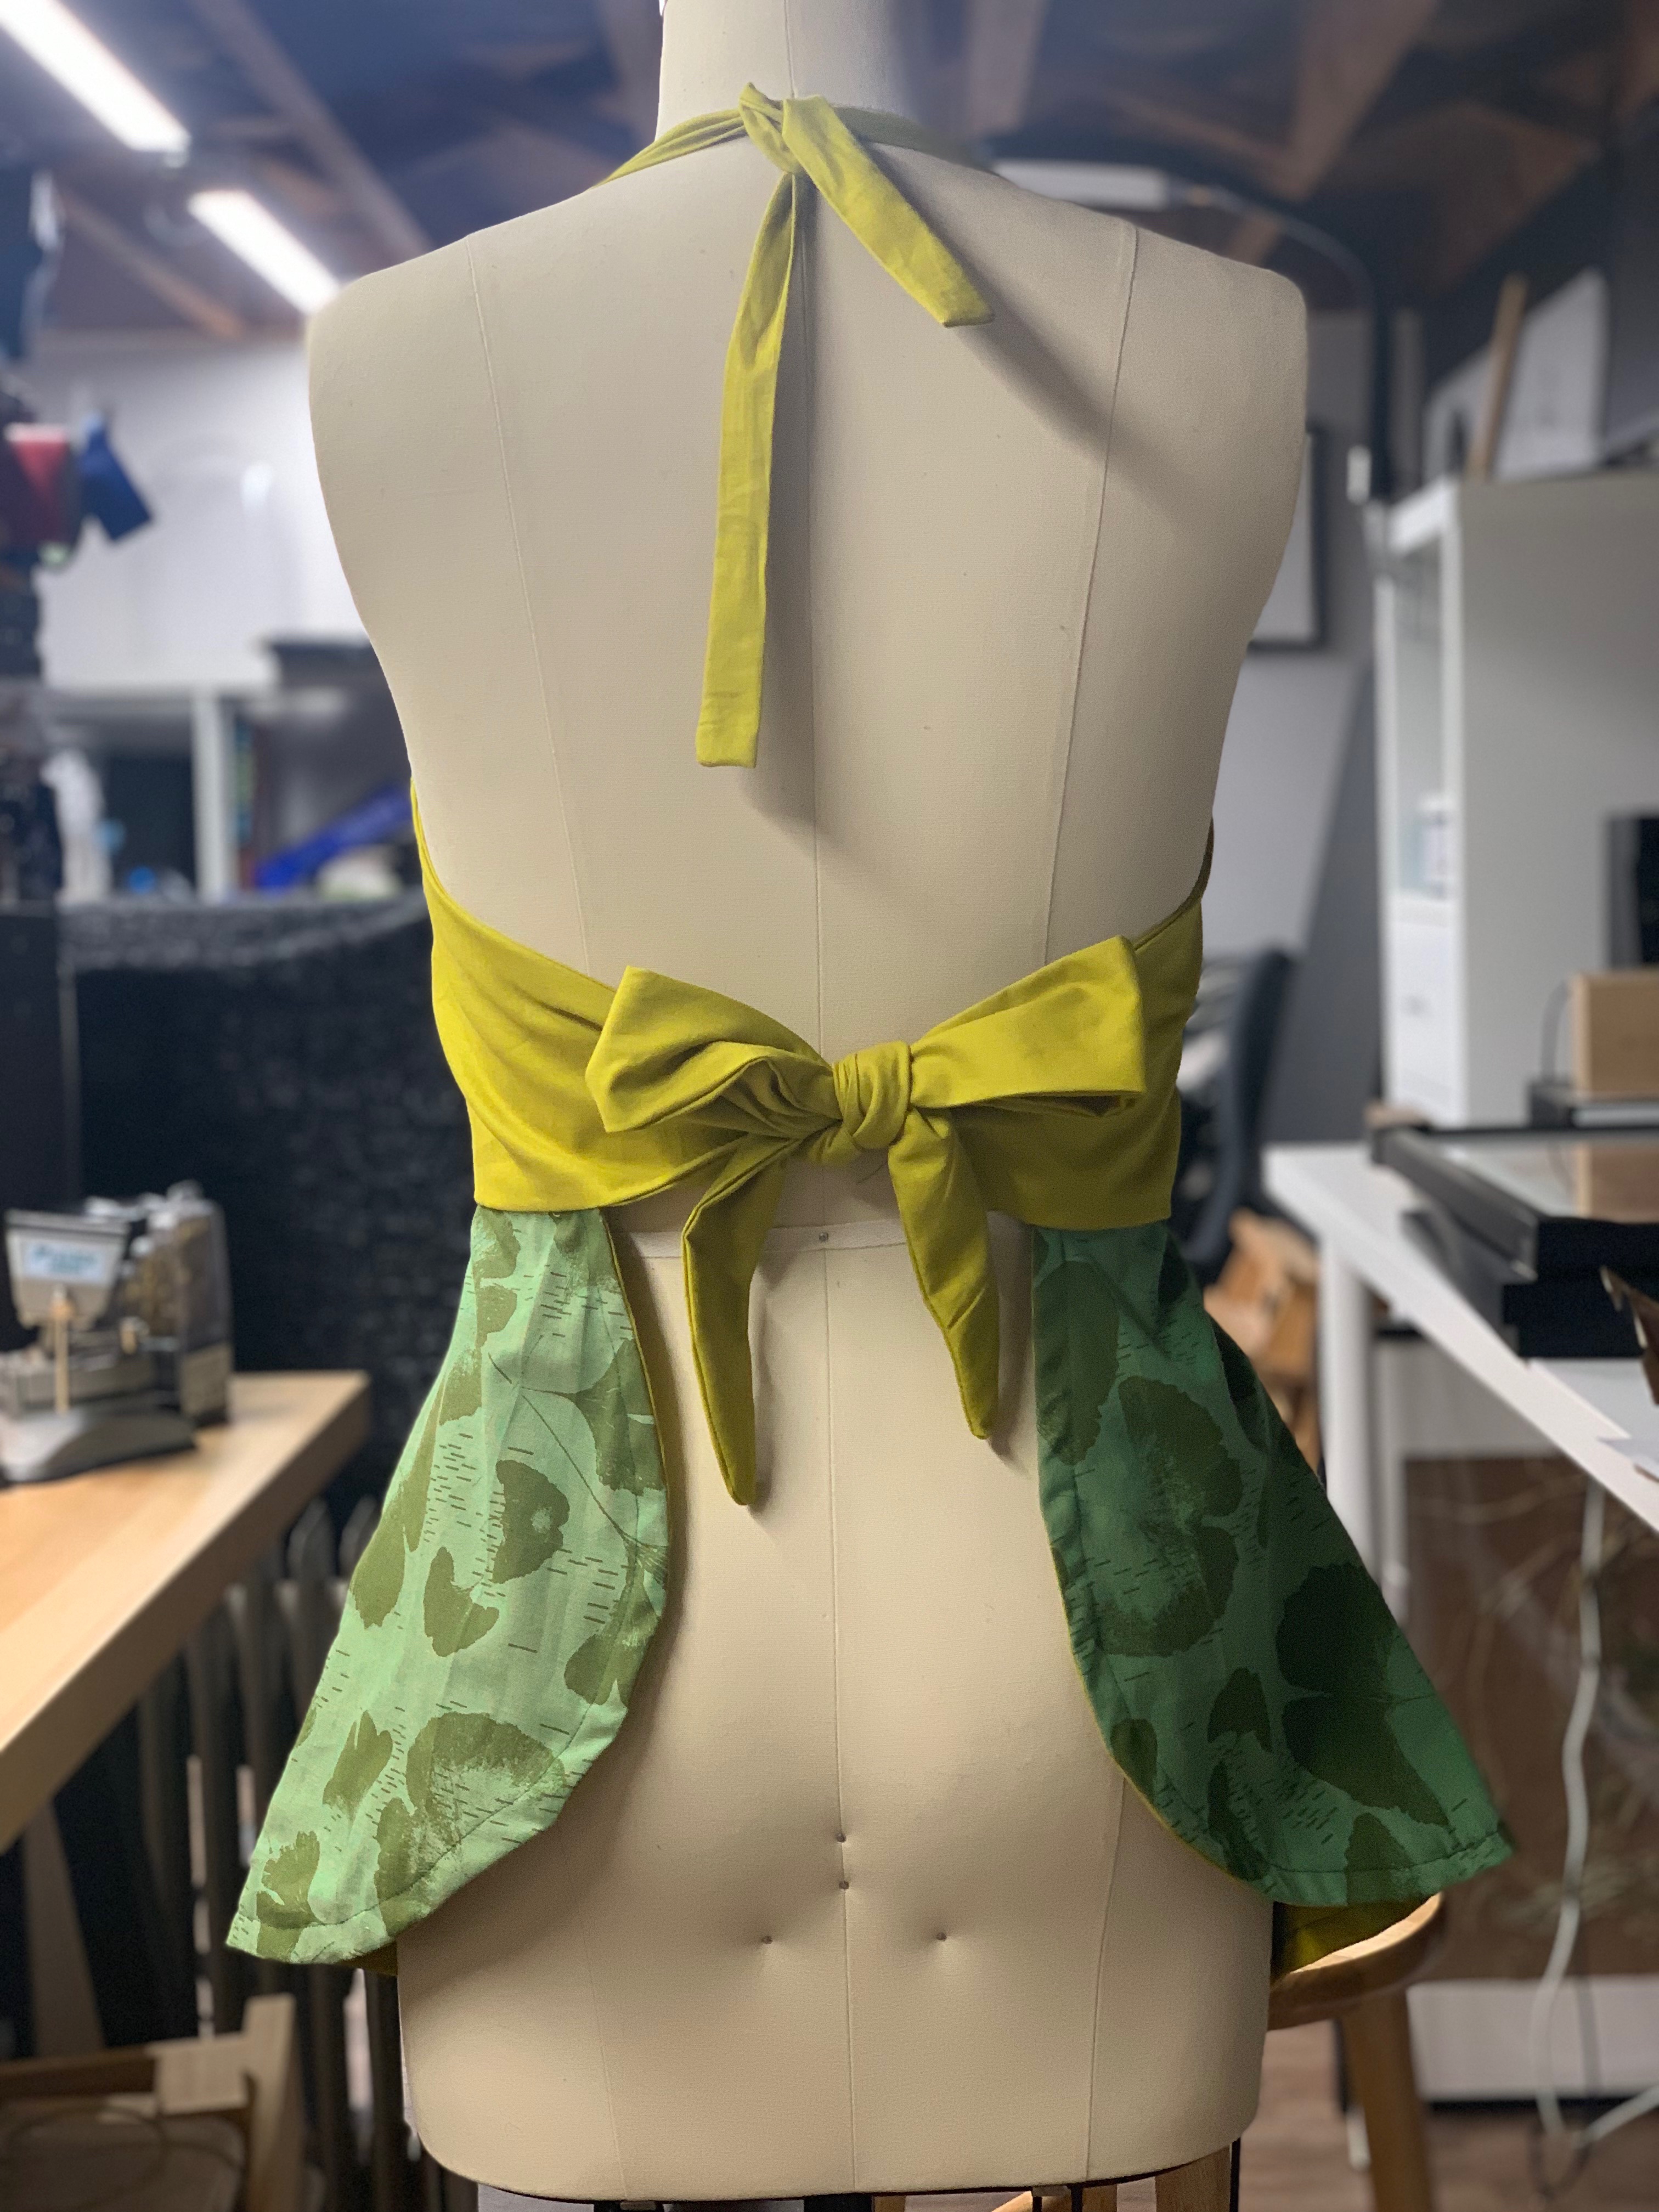 A side view of the apron, featuring a ginkgo leaf motif in shades of green